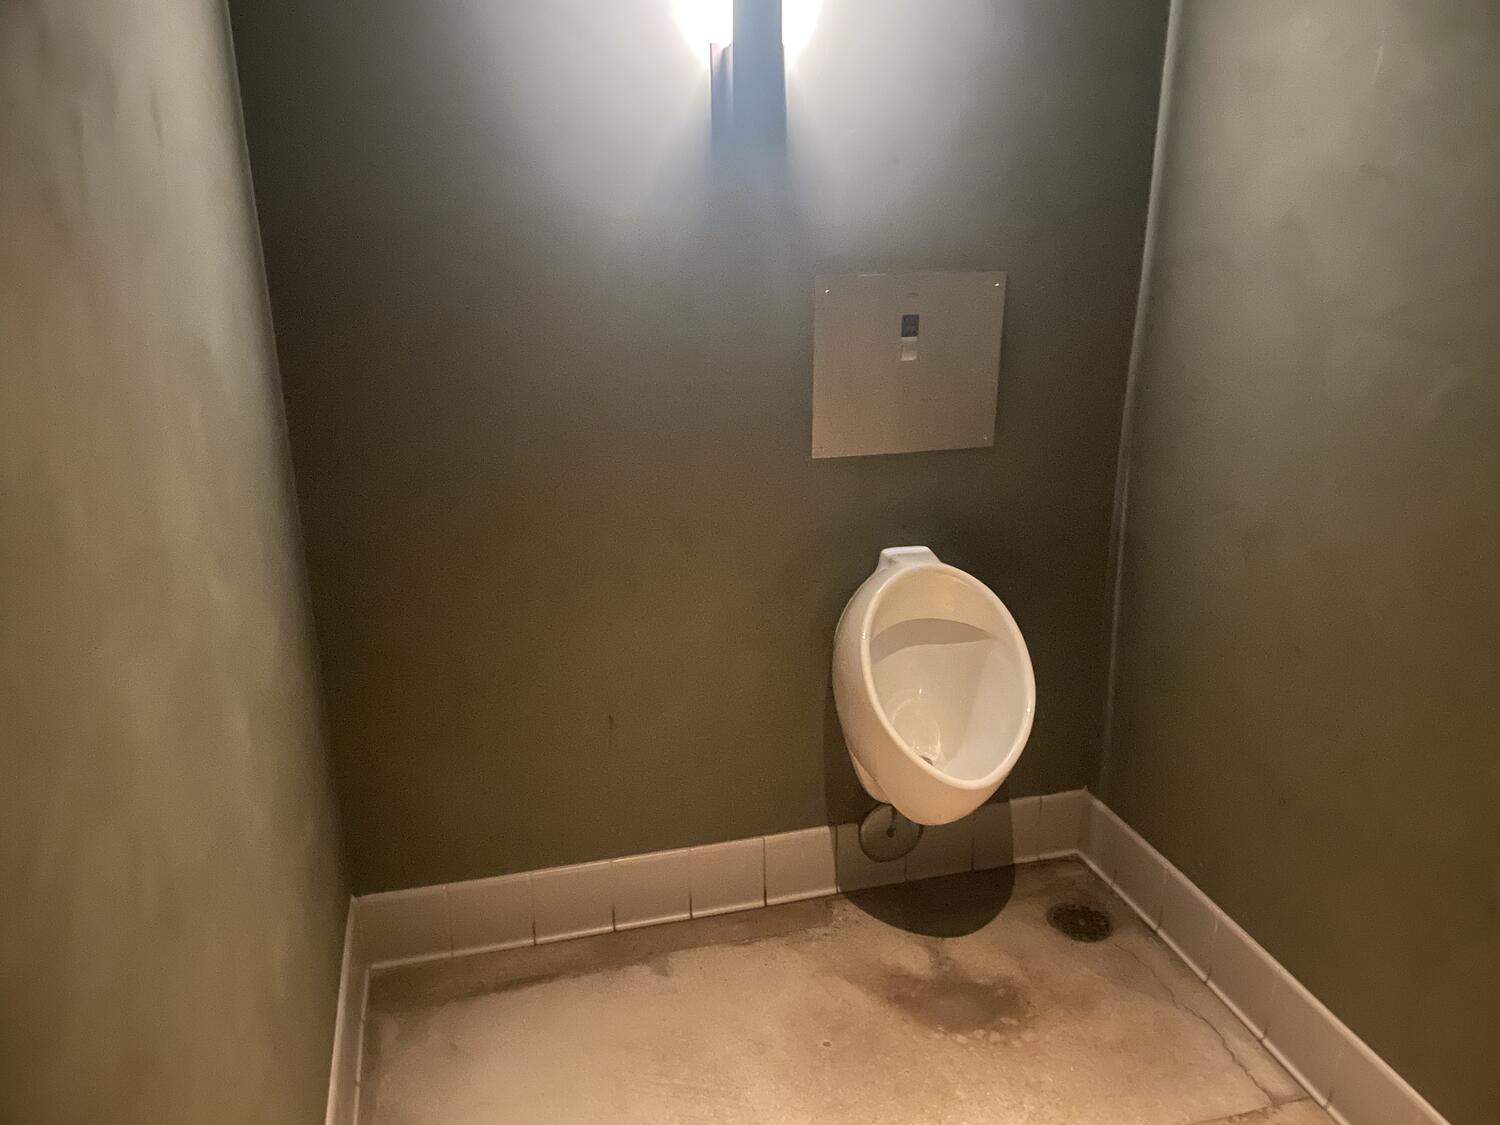 A solitary urinal in a very large restroom. It's off-center on the wall.